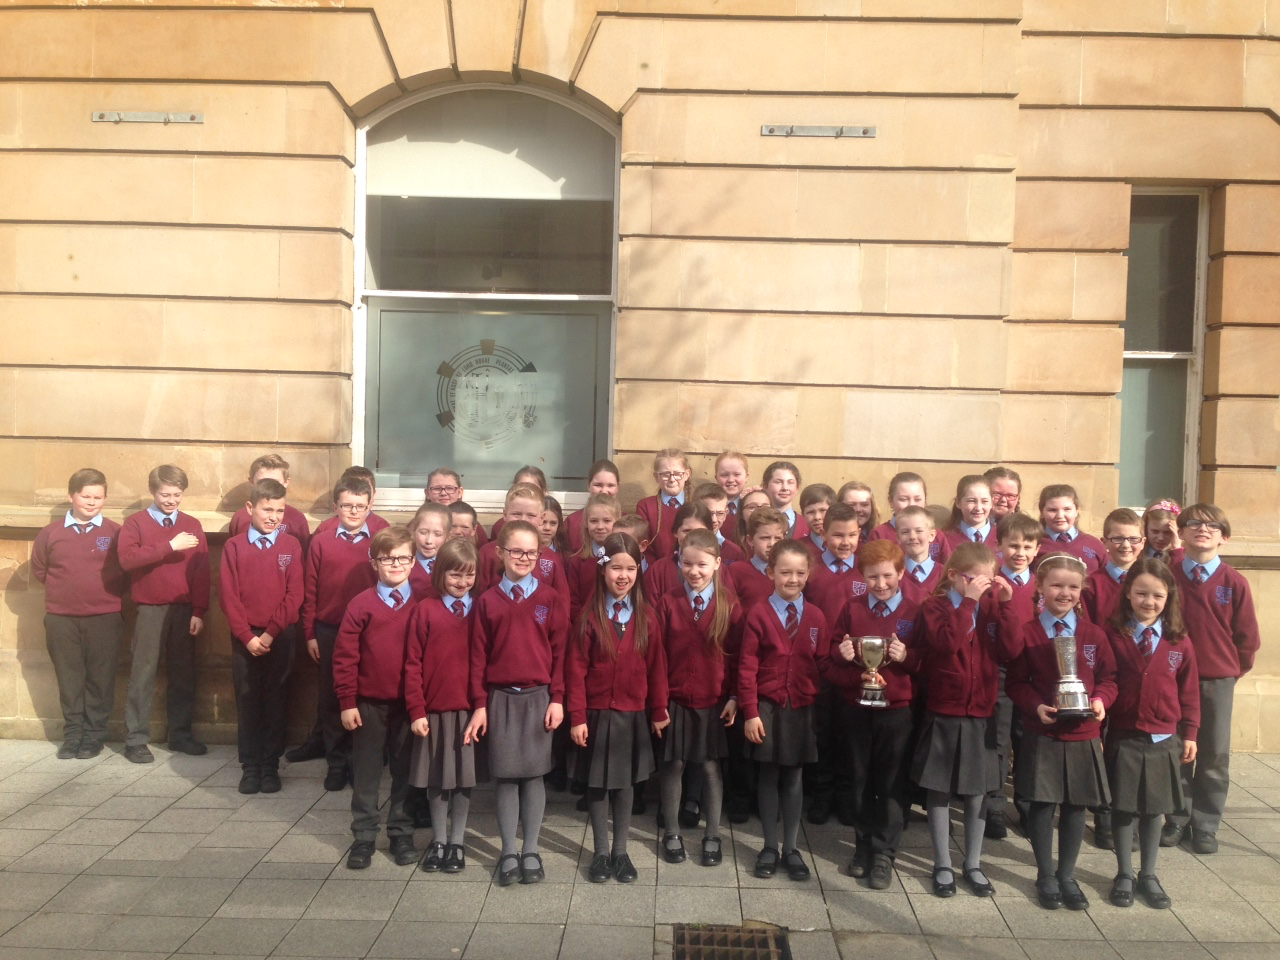 Congratulations to all our choirs last week who each secured first place in their class at Coleraine Music Festival.